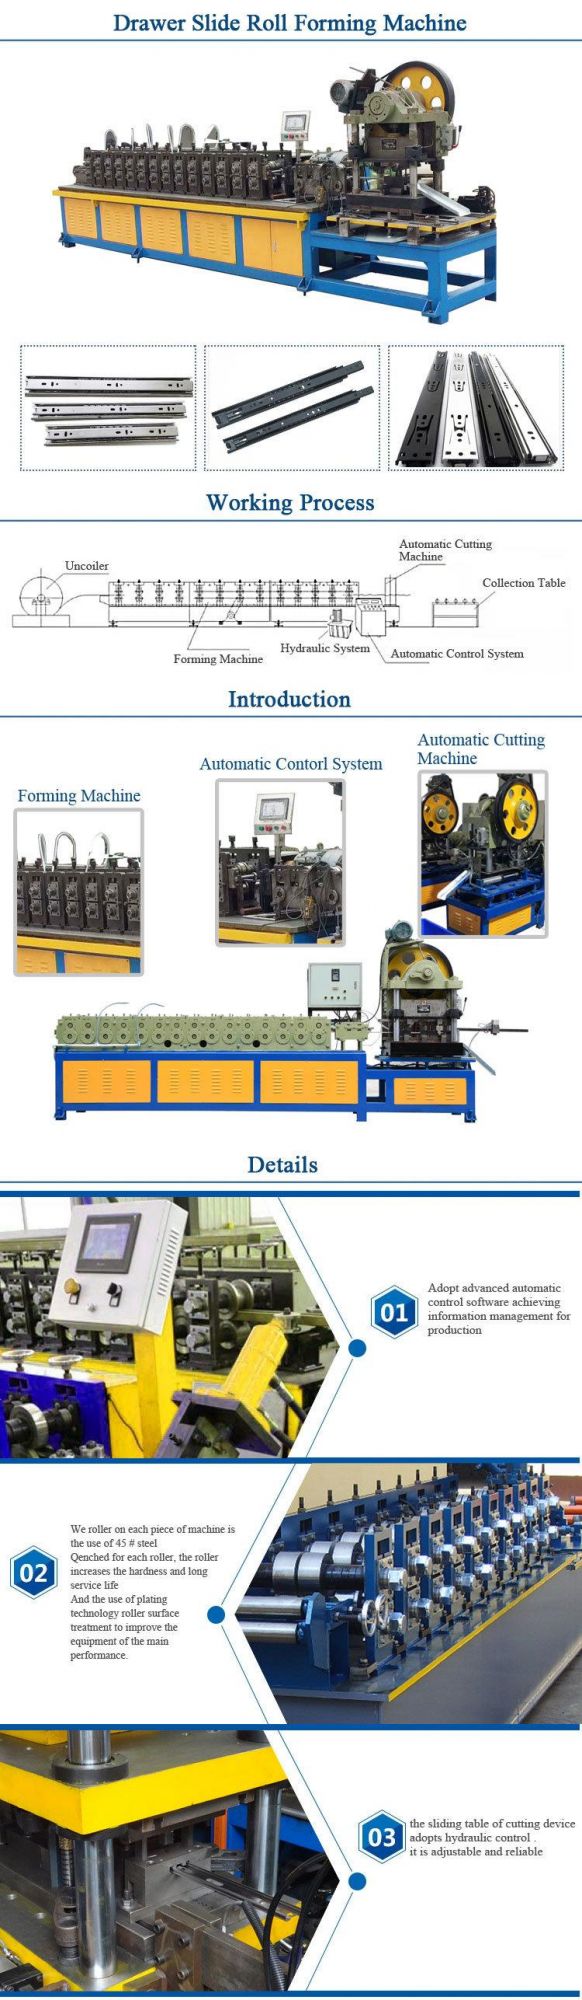 Light Weight Roll Forming Machine for Drawer Slide